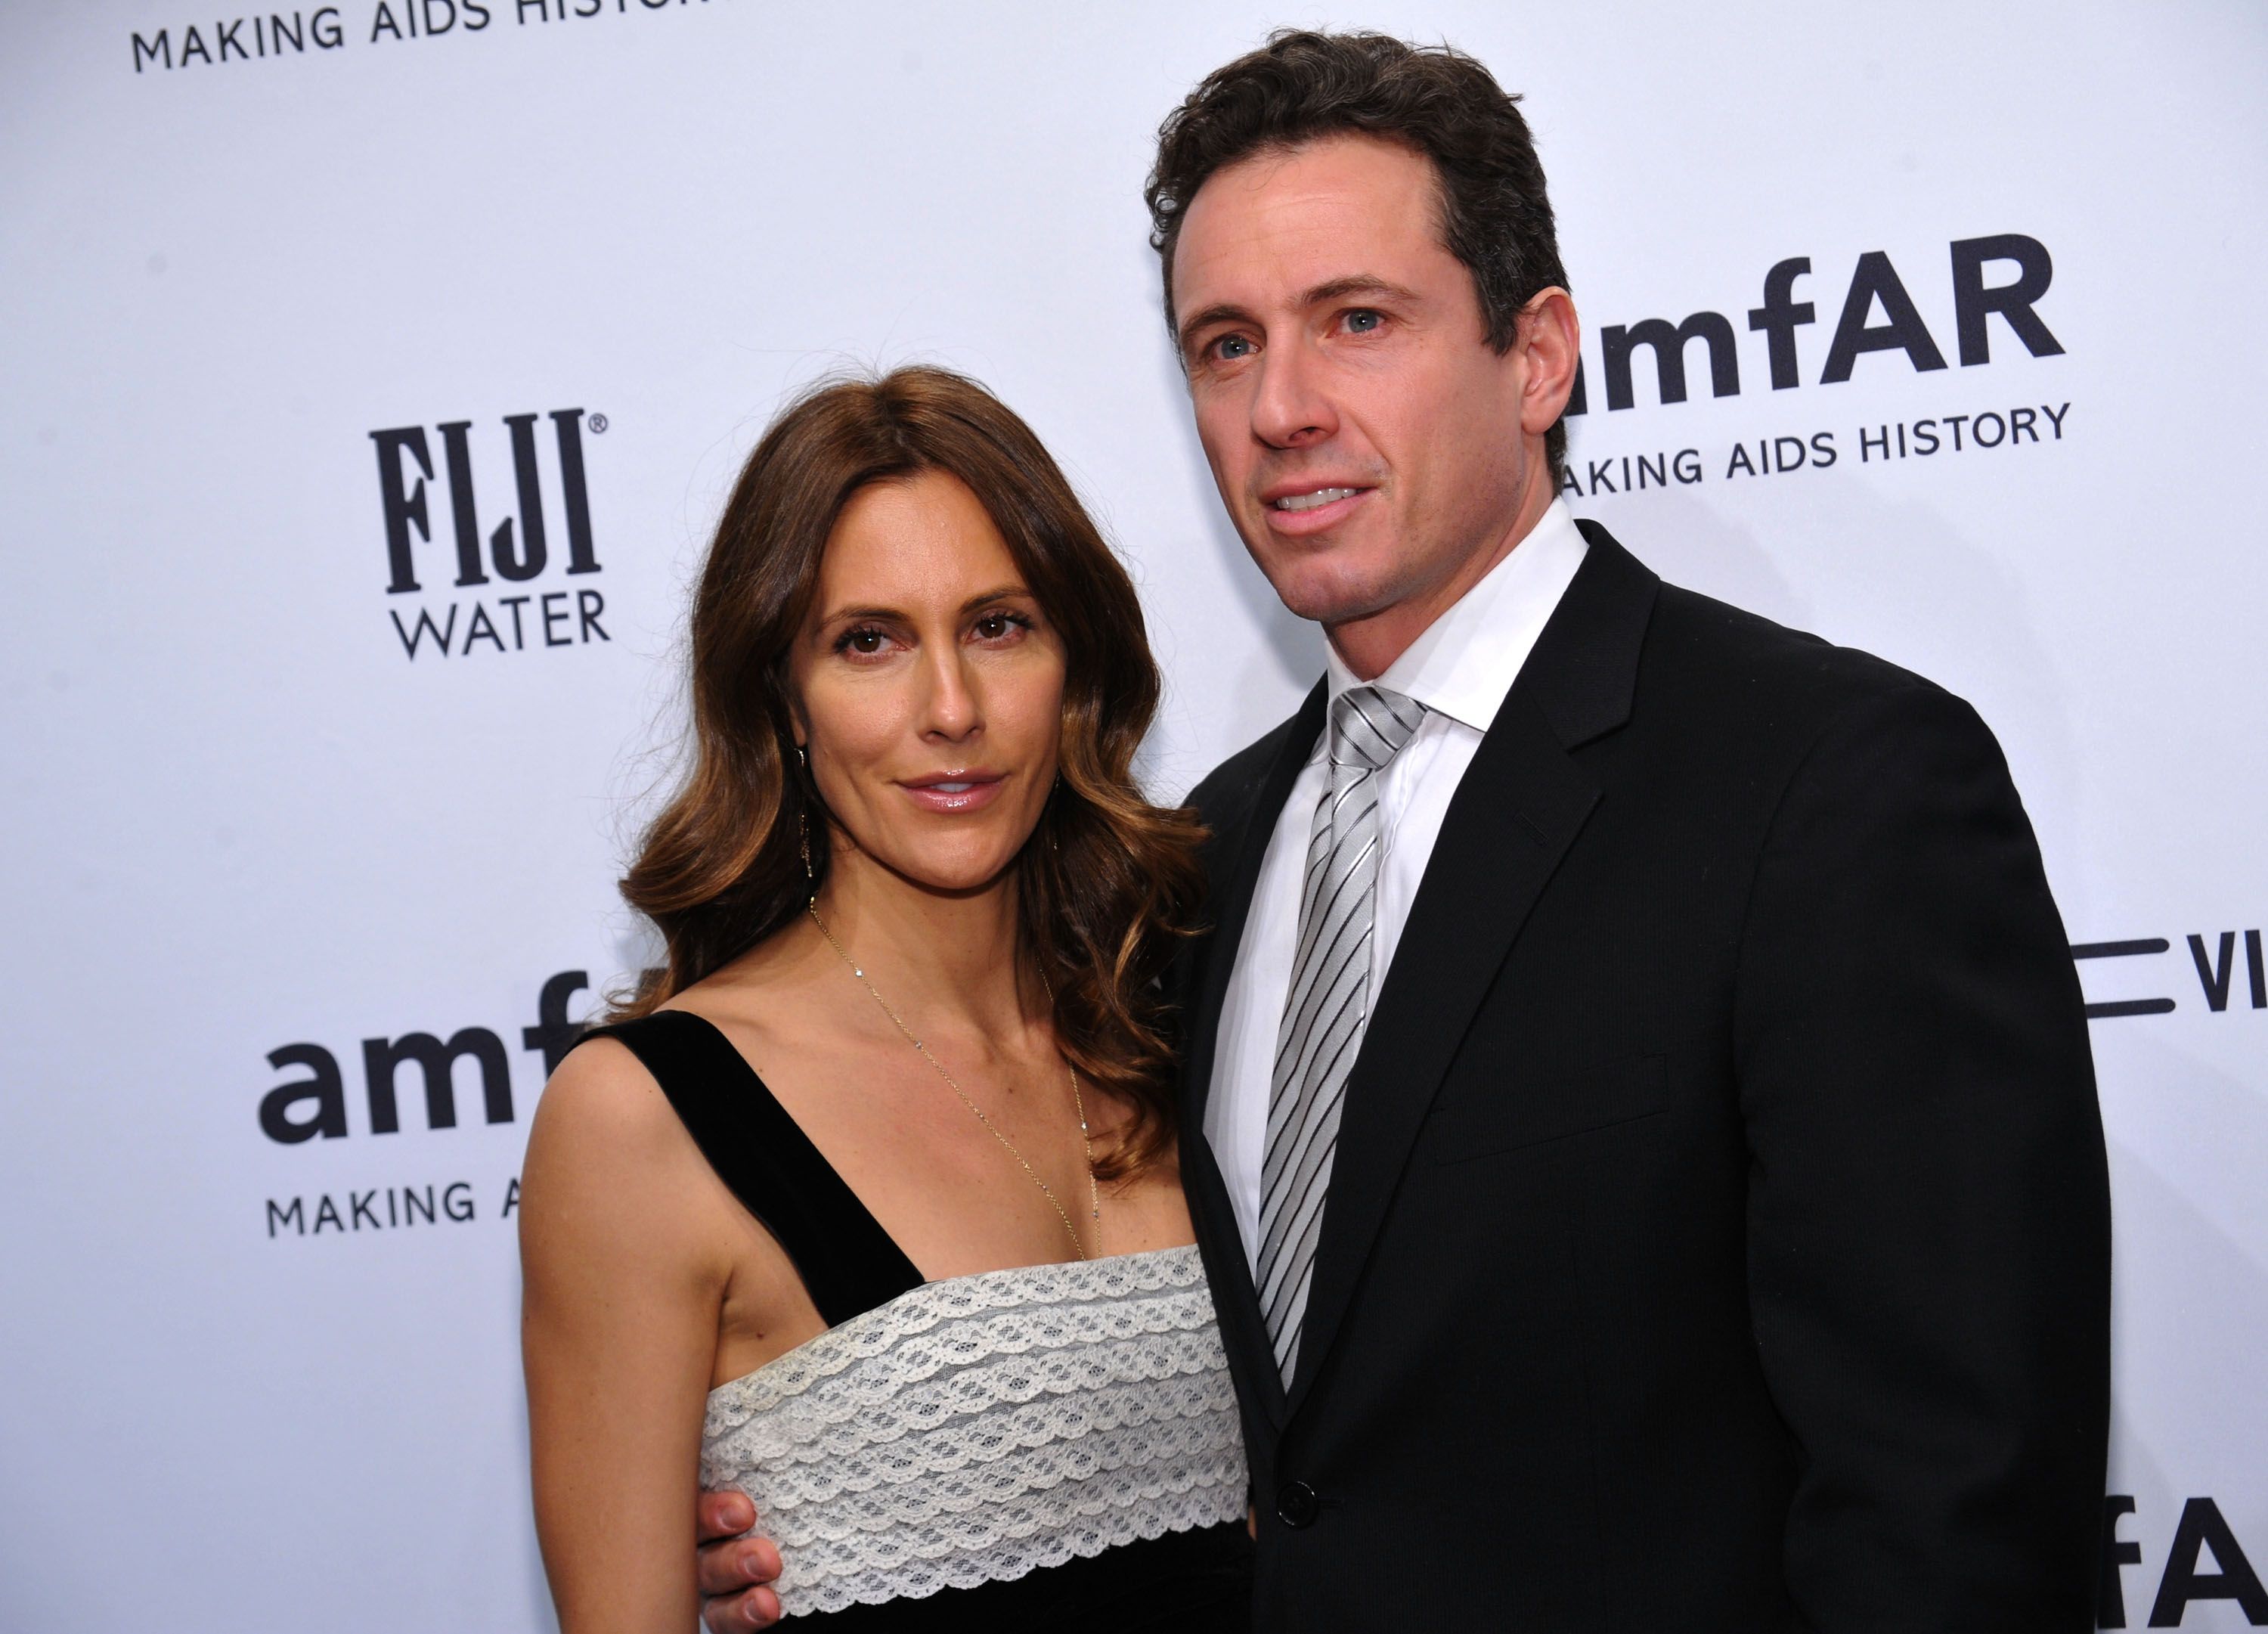 Cristina Cuomo and Chris Cuomo at the amfAR New York Gala to kick off Fall 2013 Fashion Week at Cipriani Wall Street on February 6, 2013 | Photo: Getty Images